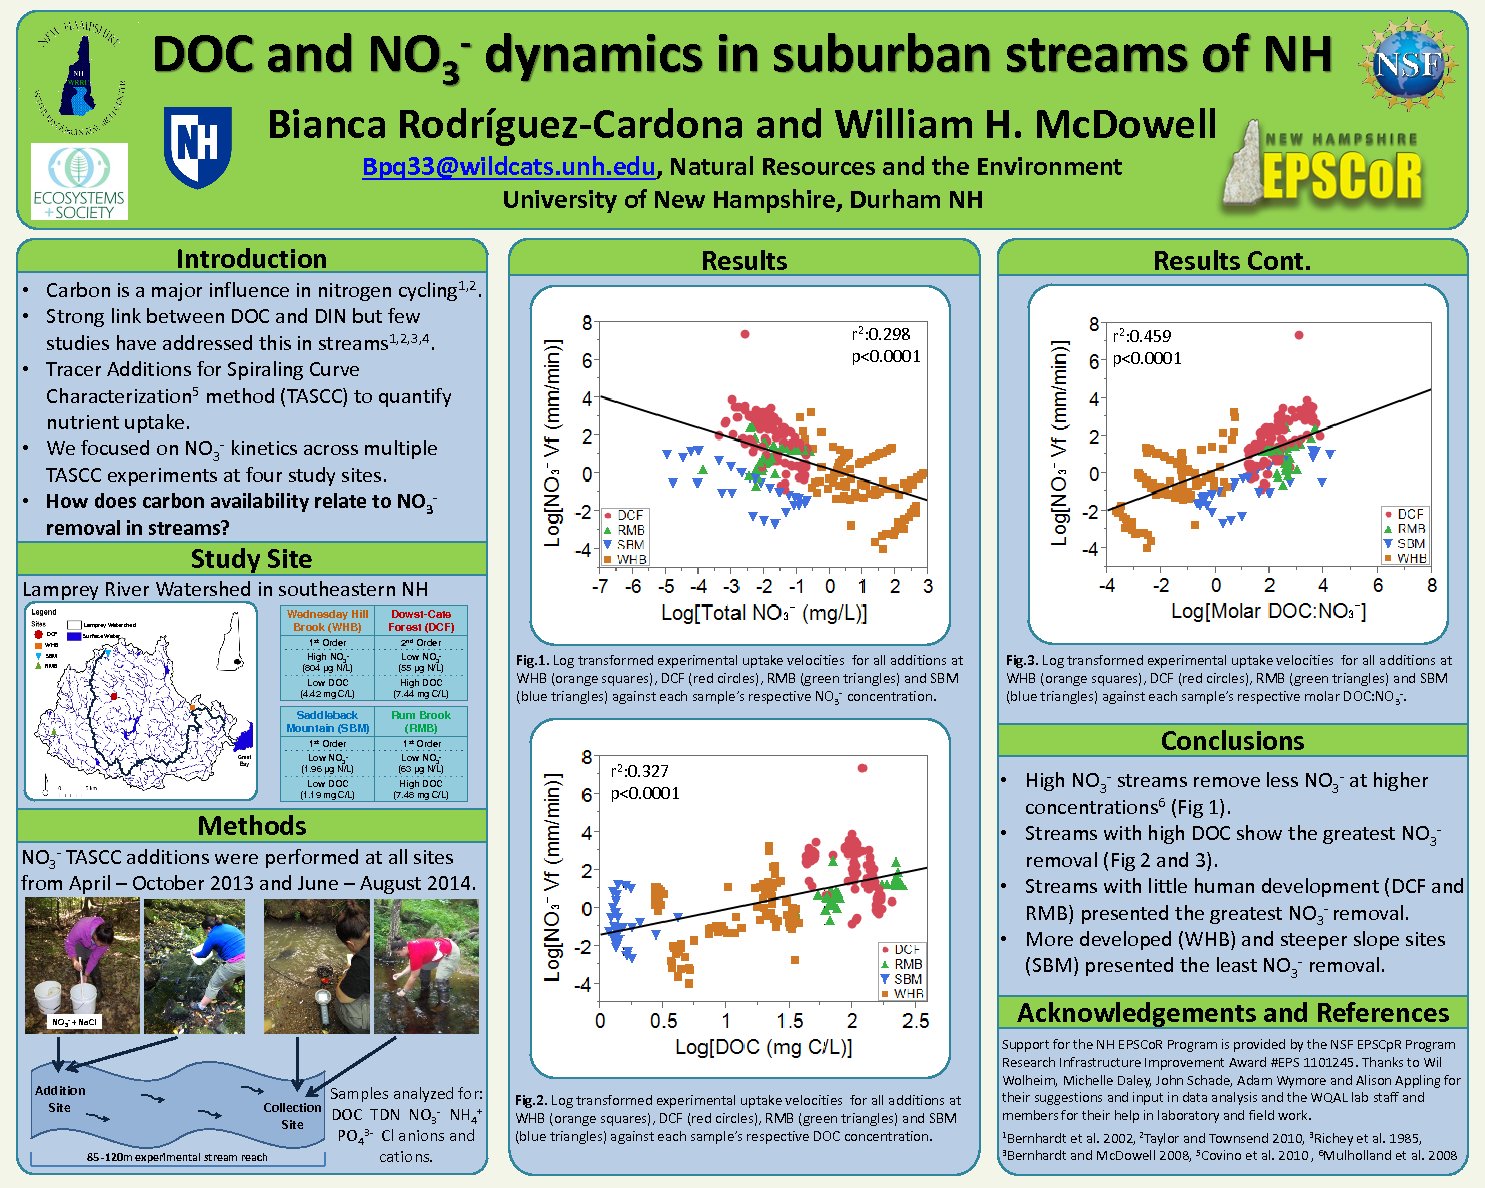 Doc And No3- Dynamics In Suburban Streams Of Nh by bpq33